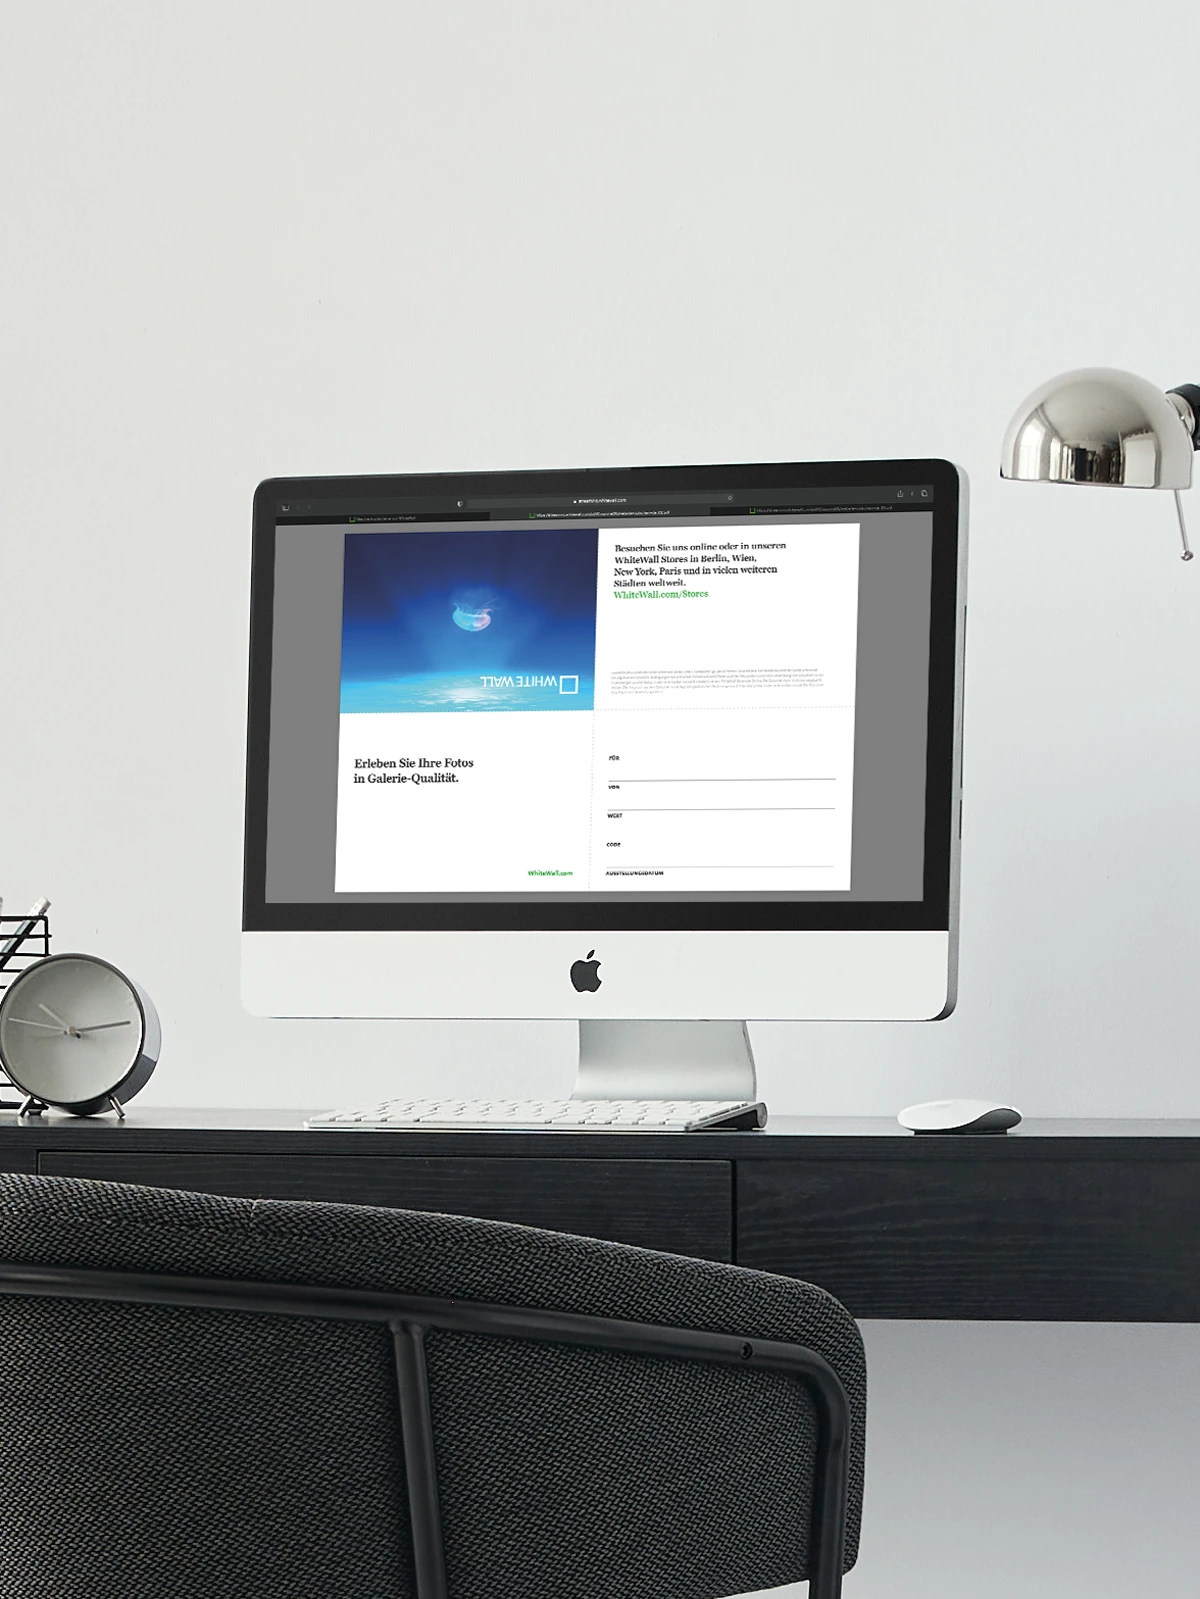 desktop pc with the digital whitewall gift certificate displayed on the monitor.